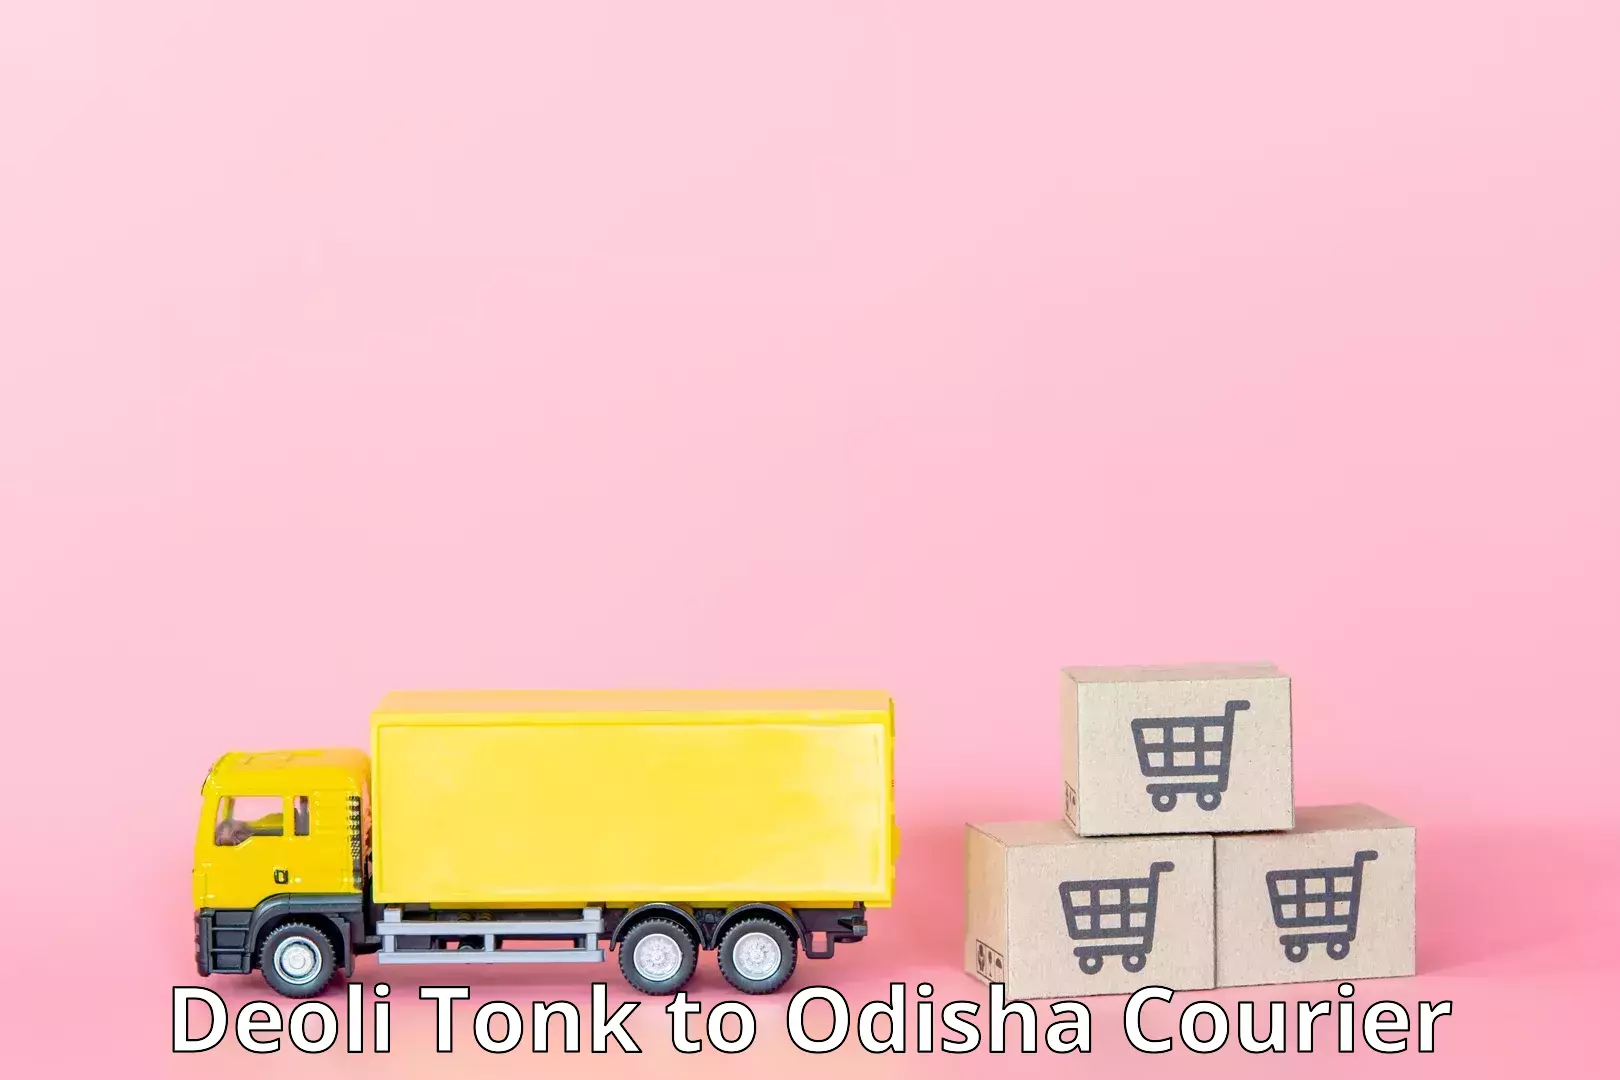 Business logistics support Deoli Tonk to Bargarh